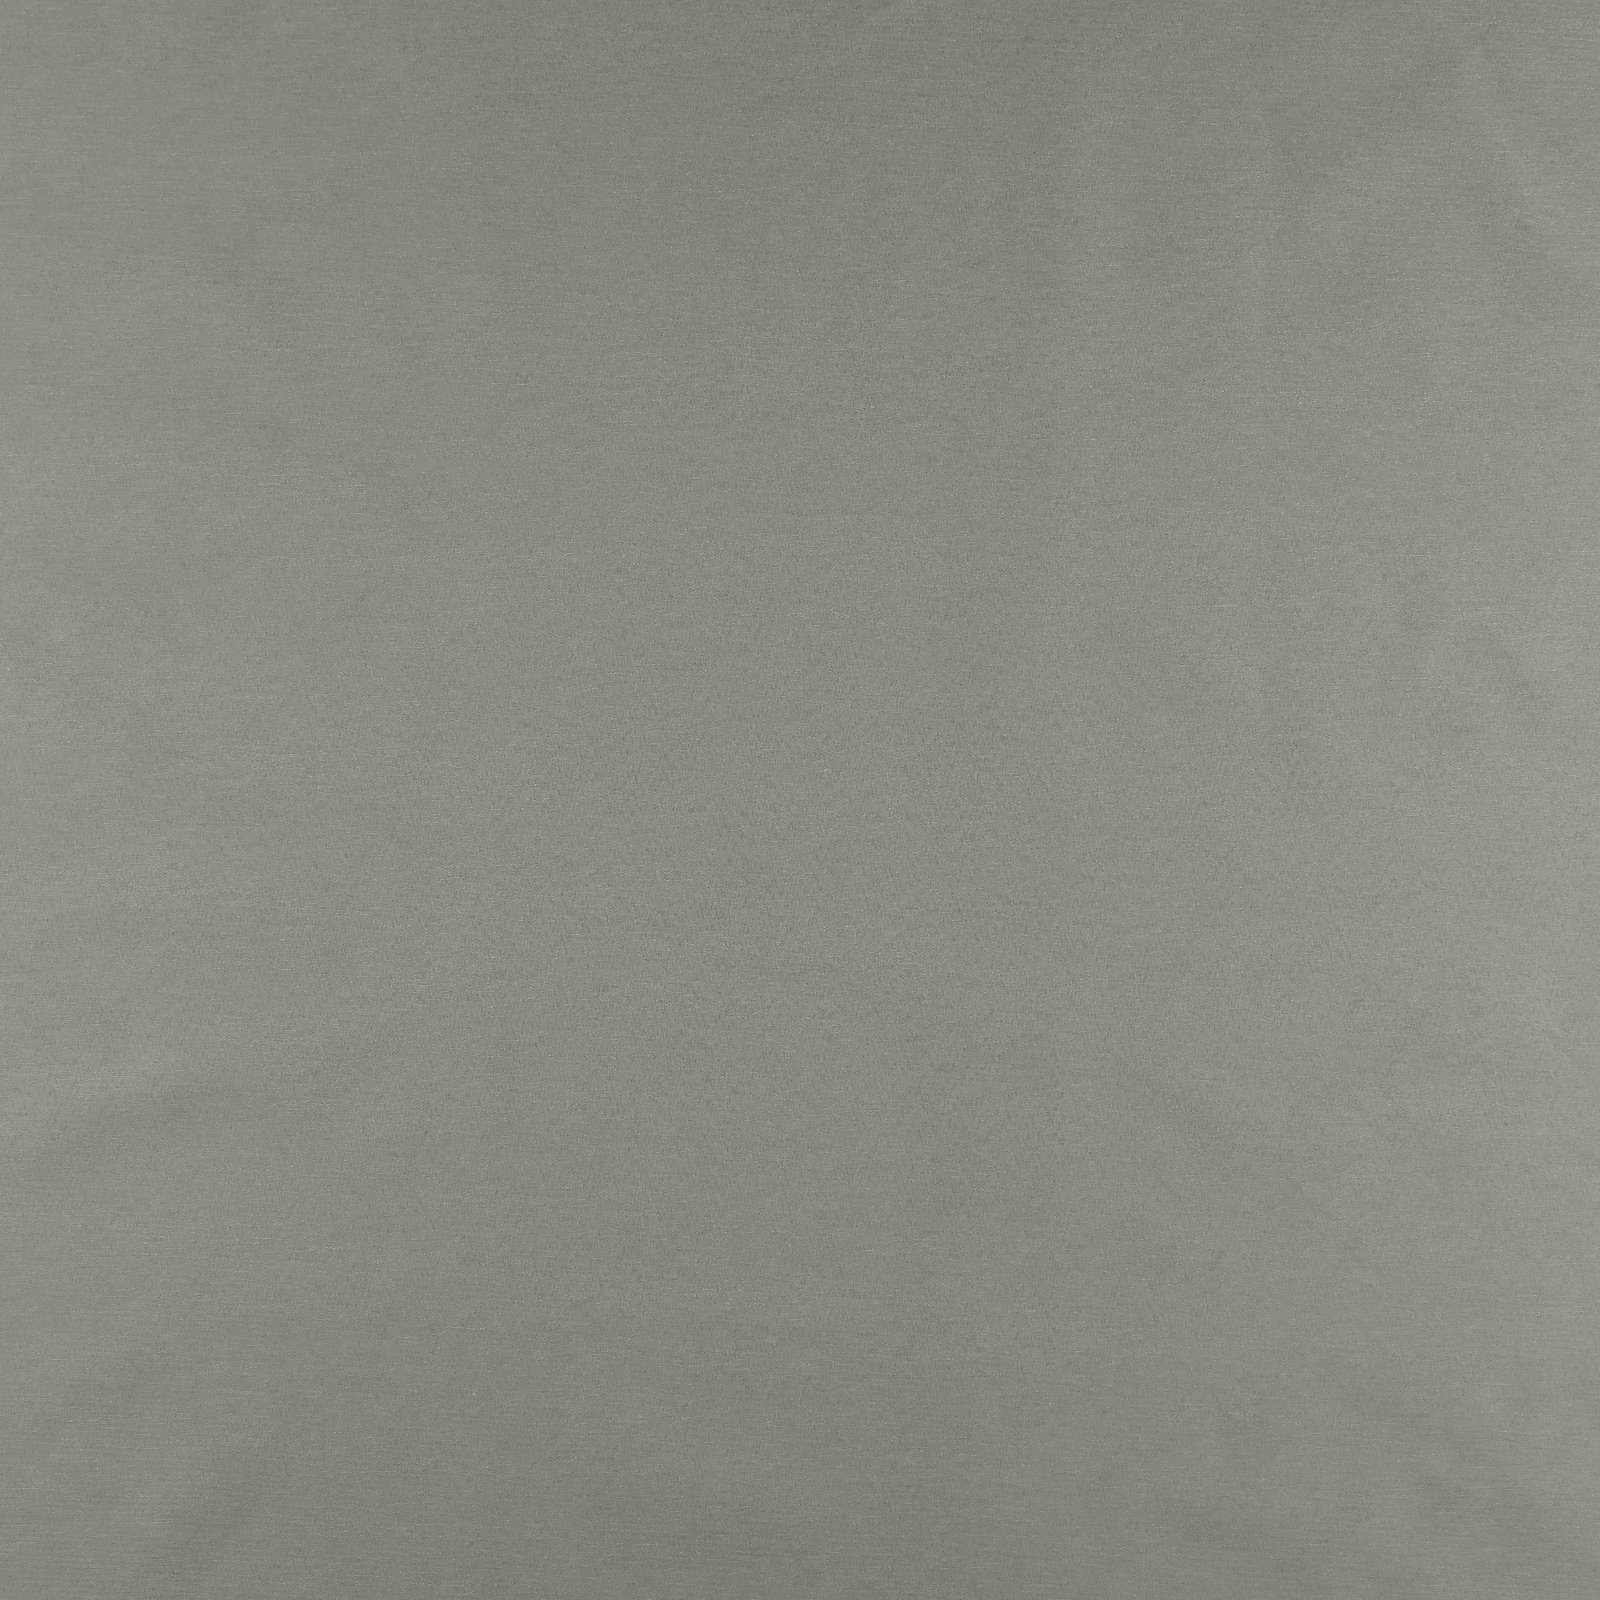 Woven oilcloth light grey 158-160 cm 870252_pack_solid